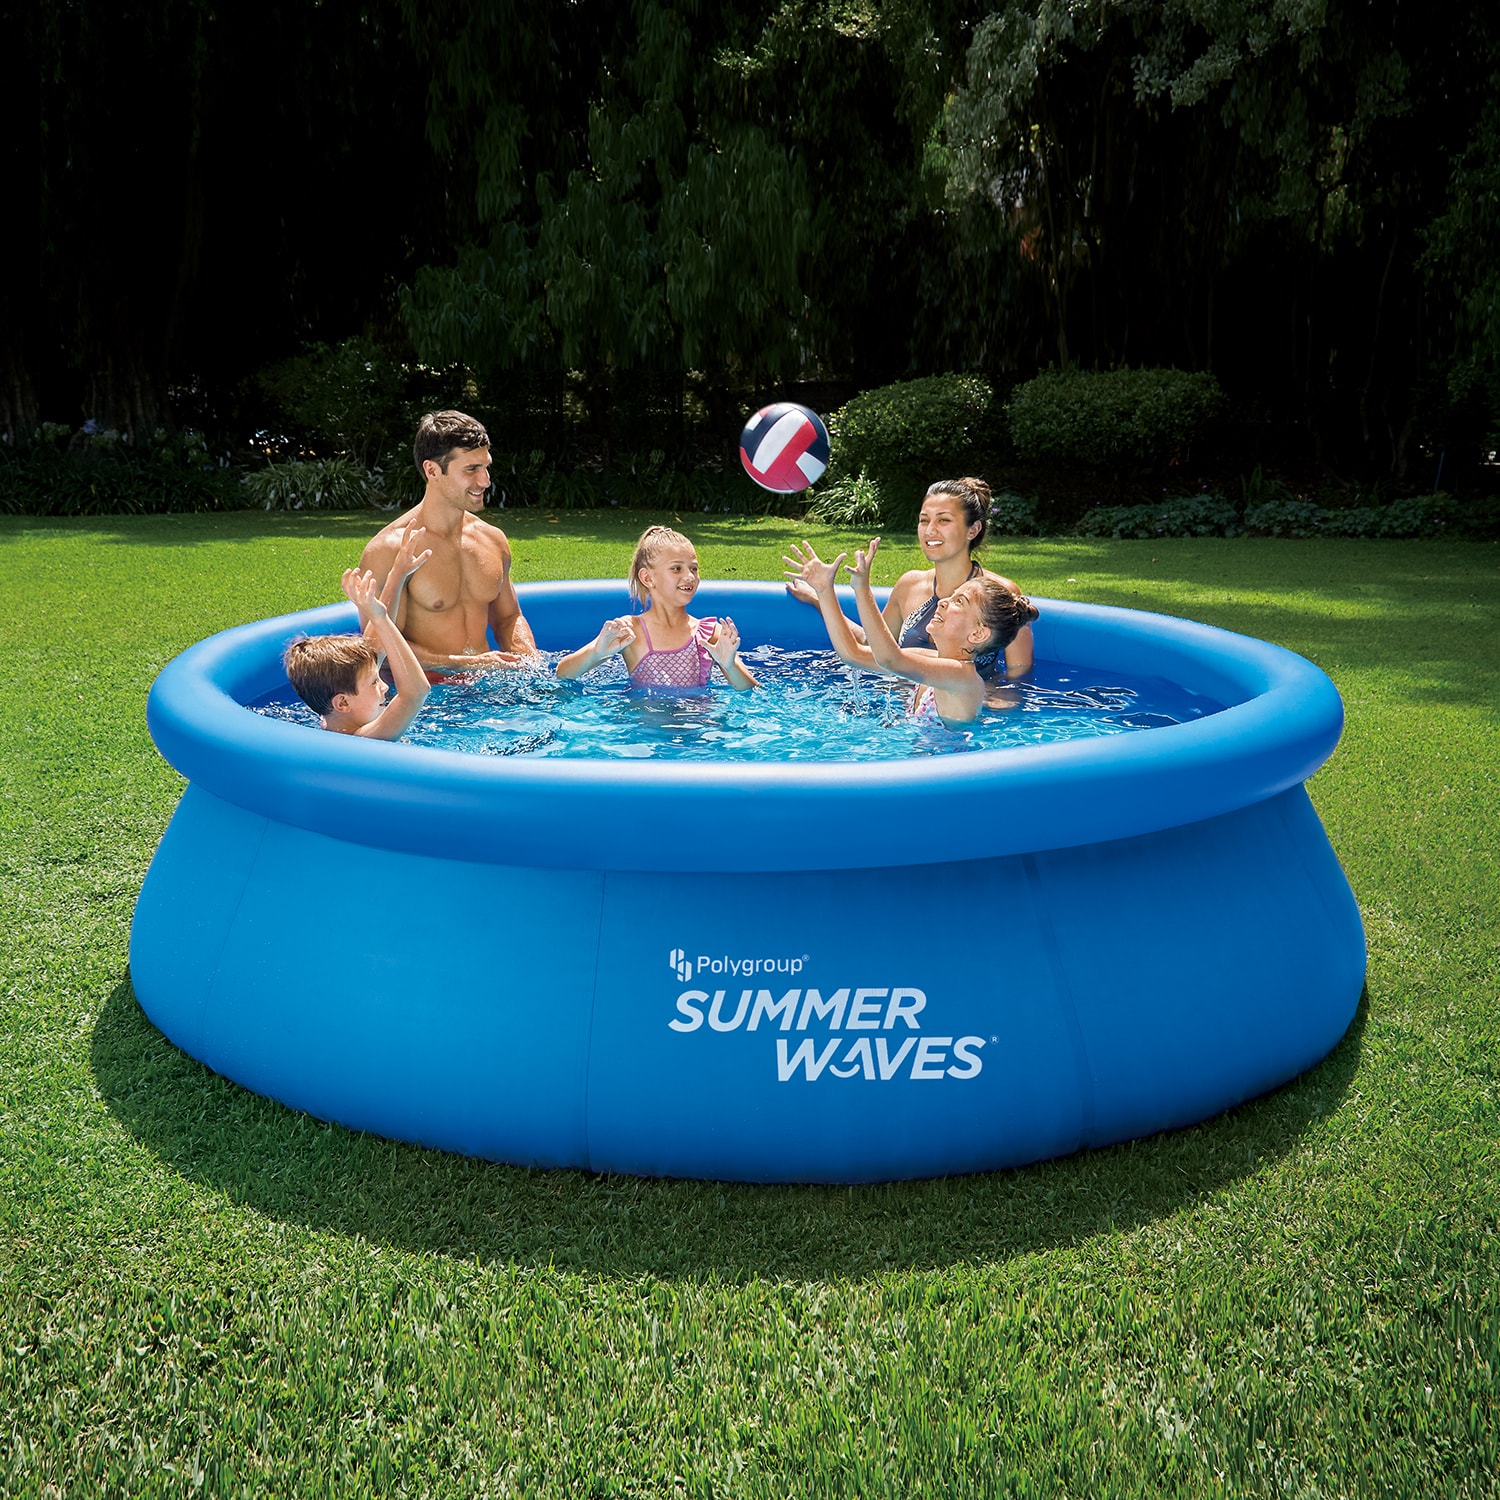 10 ft Round Pool Liner Pad for Aboves Ground Swimming Pools,Swimming Pool  Ground Cloth Aboves Ground Pool Mat Under Pool Floor Padding,Pool Equipment